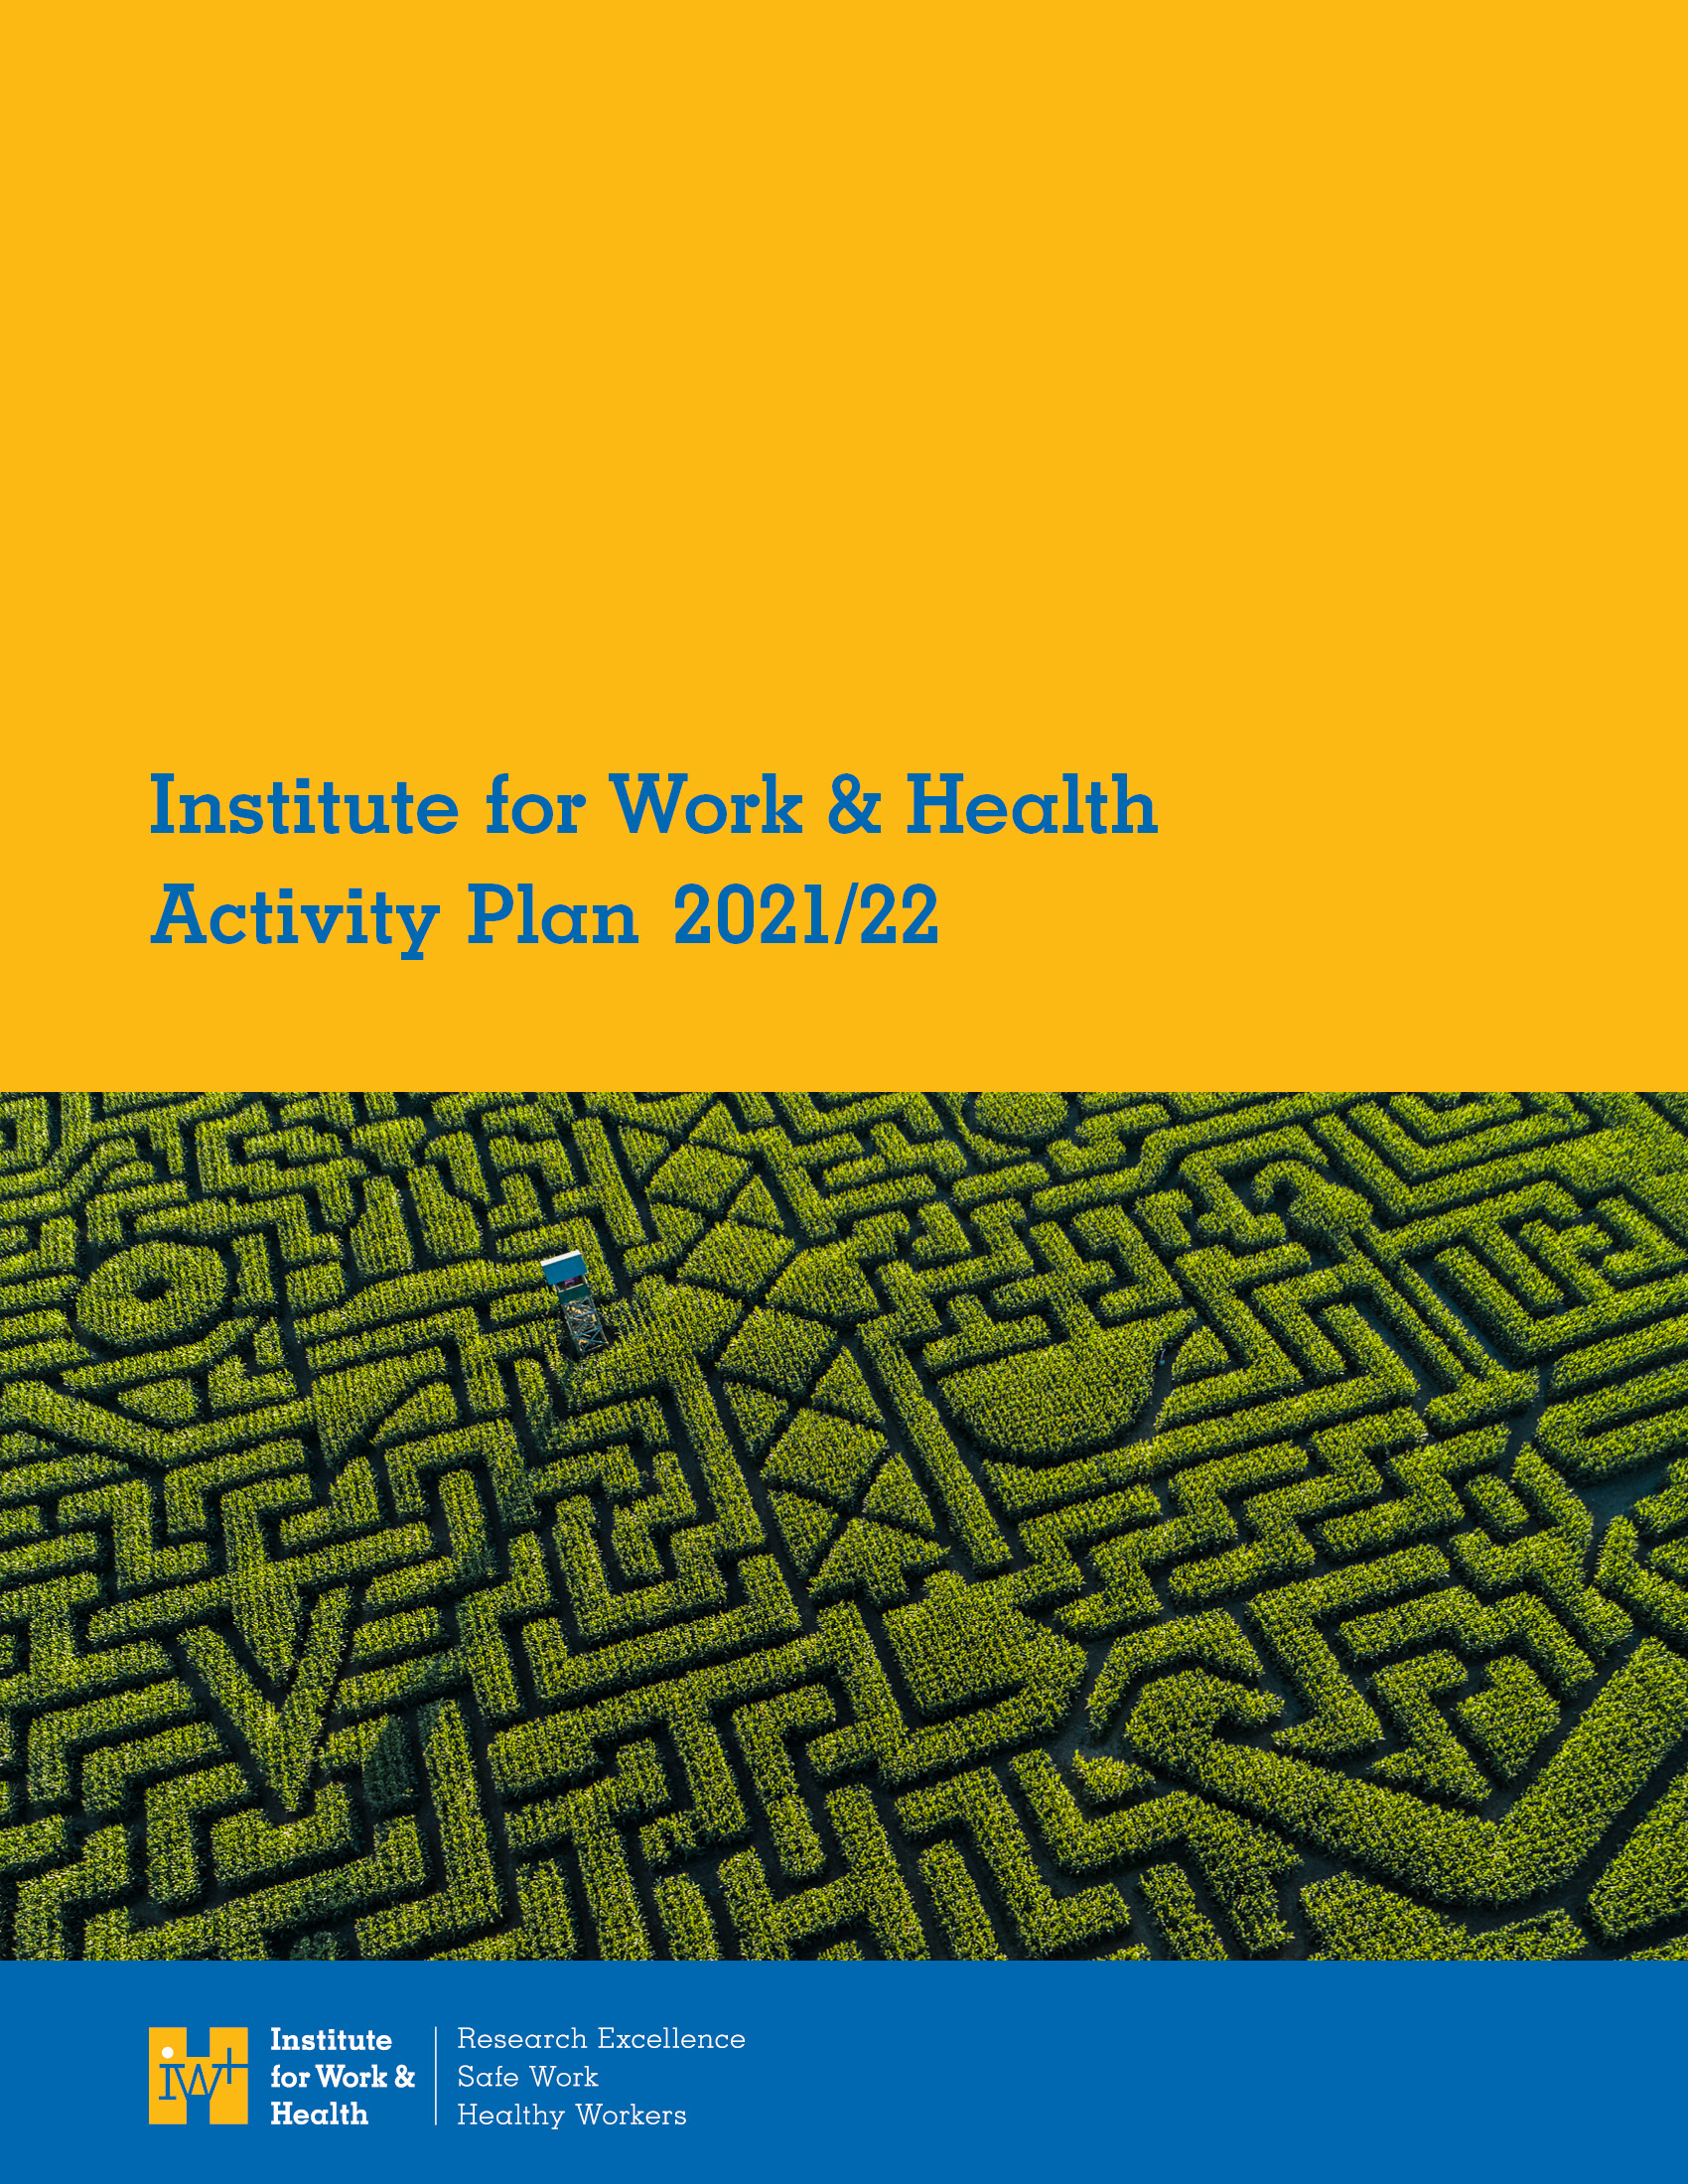 Cover of Institute for Work & Health 2021-22 Activity Plan